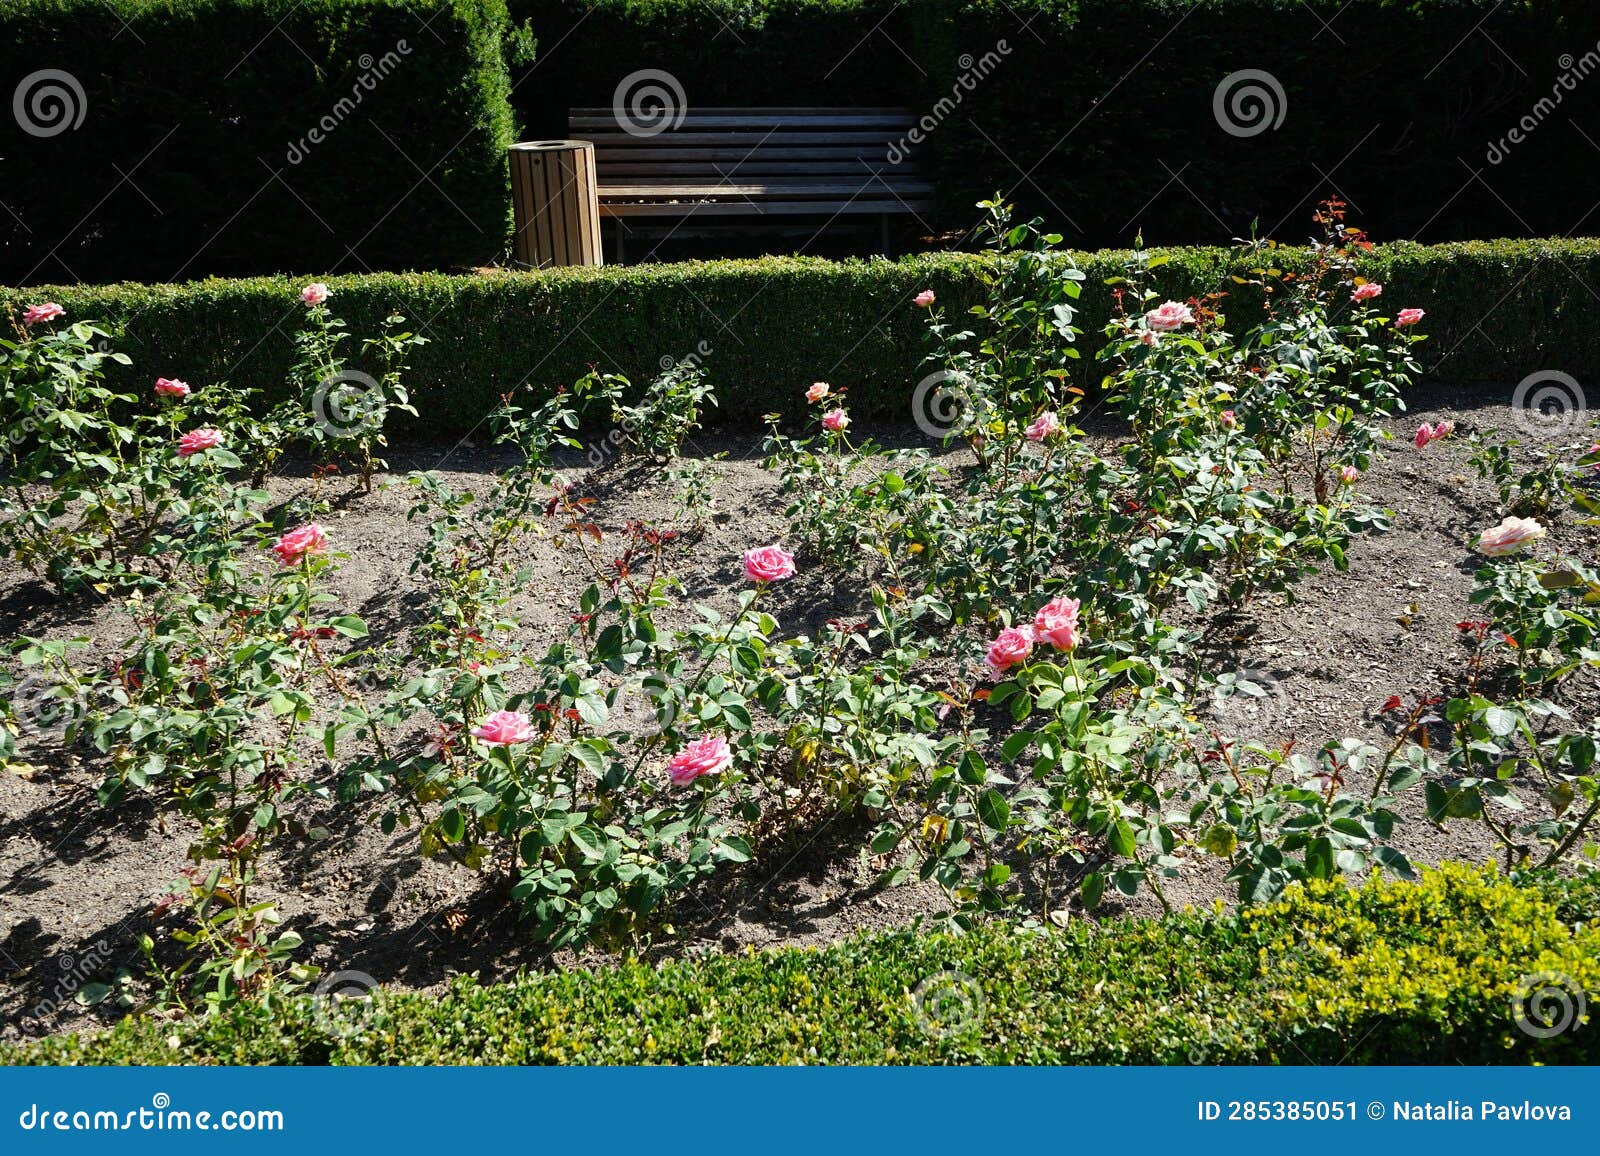 hybrid tea rose, rosa 'mondiale', blooms with subtle salmon pink flowers in july in the park. berlin, germany